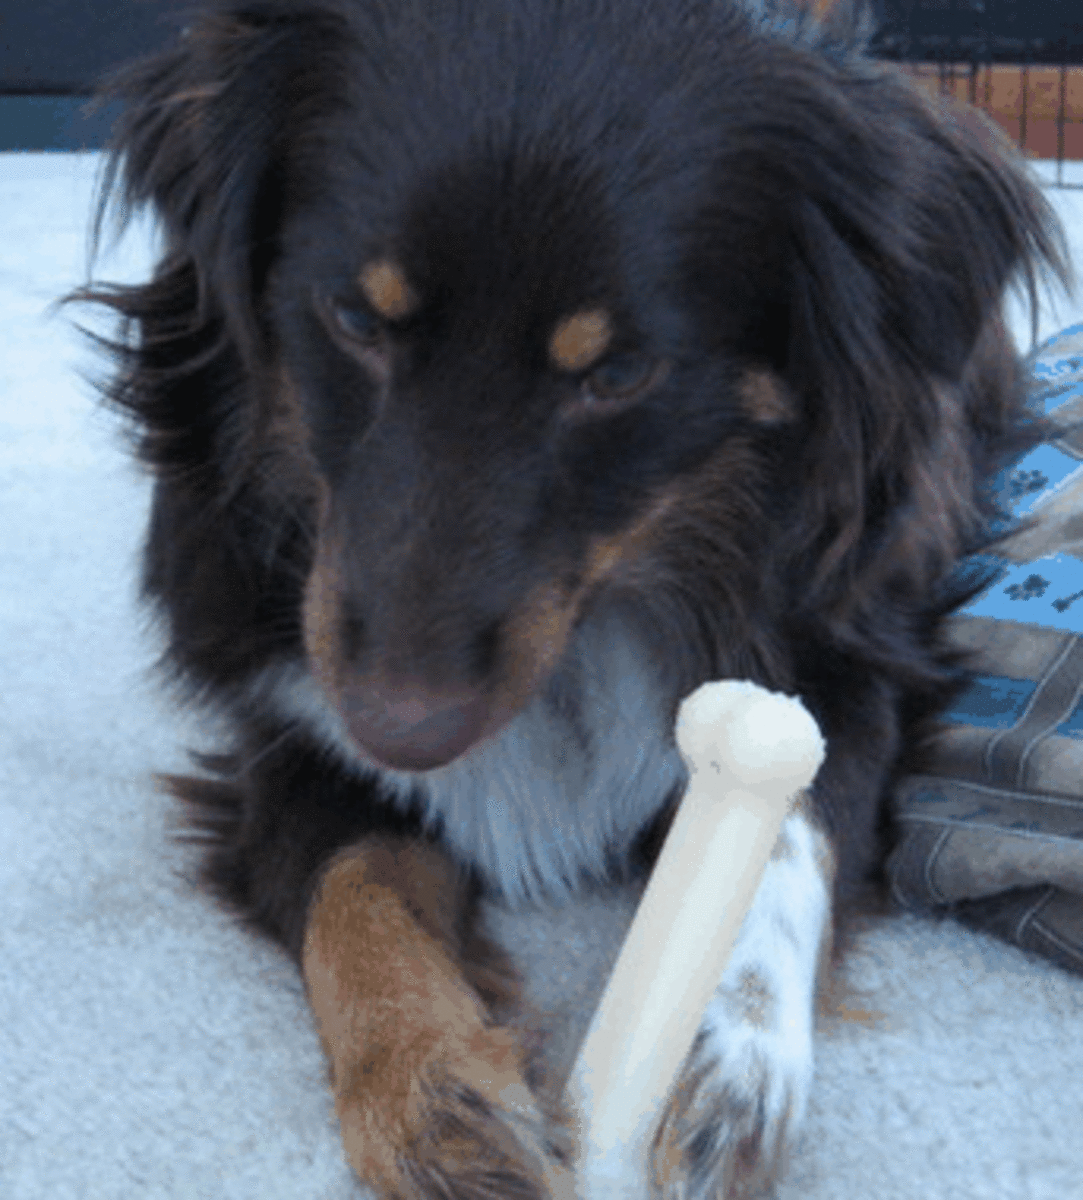 This dog is a bit too protective of its bone.